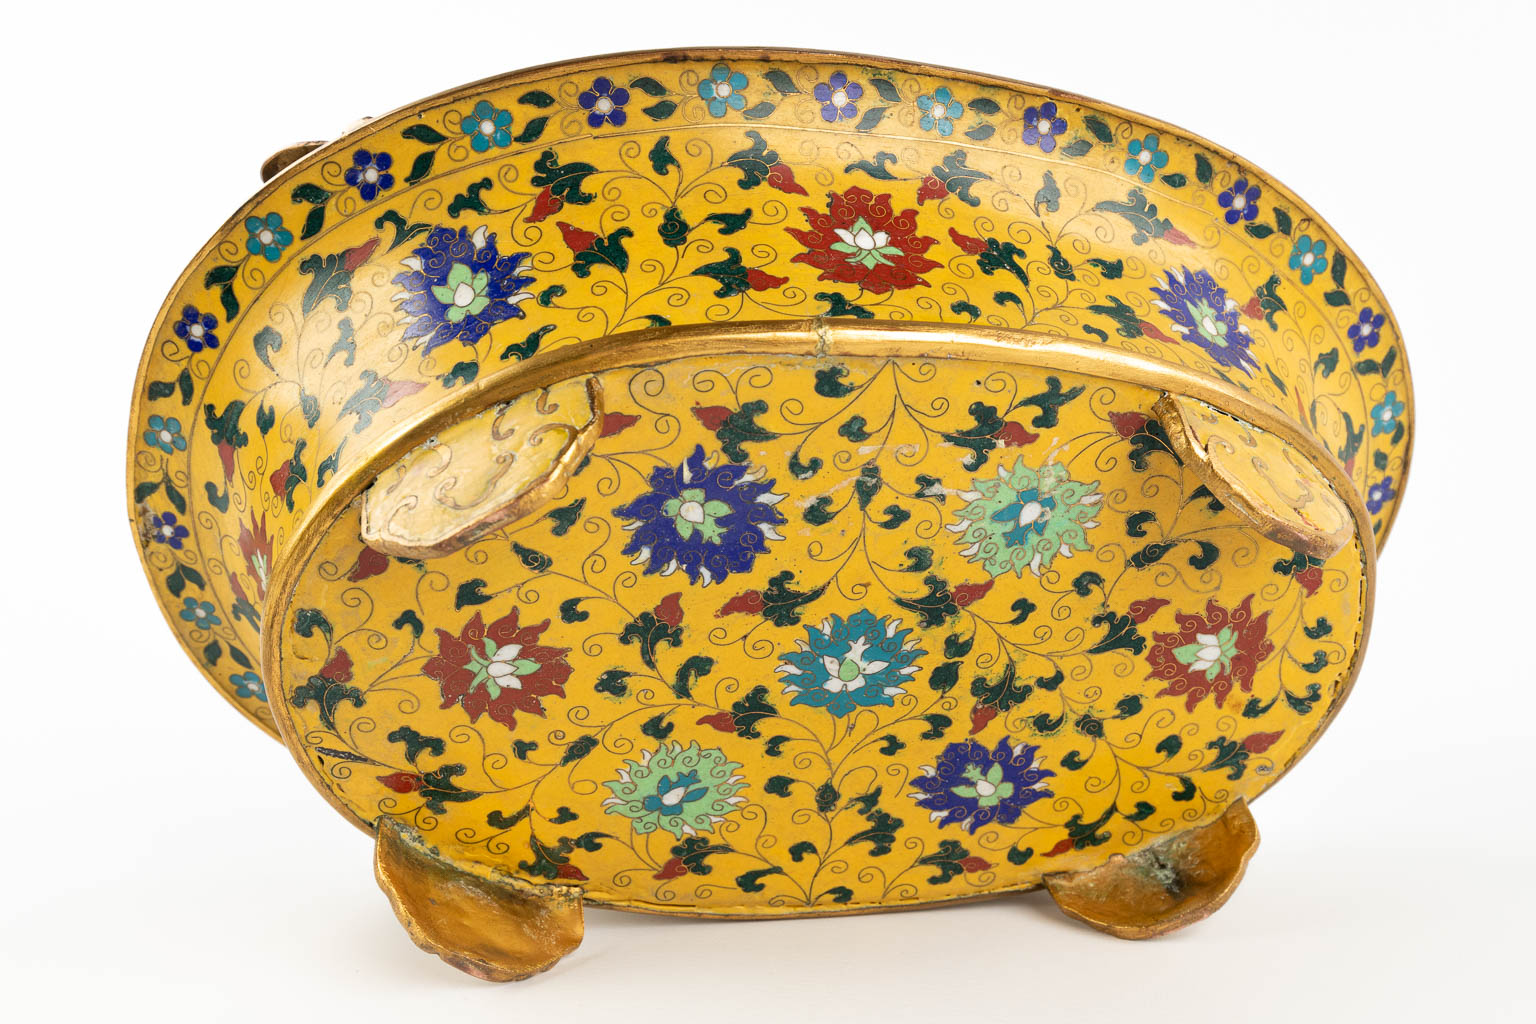 A Chinese cloisonné bronze bowl, mounted with dragons and finished with floral decor. (D:25,5 x W:36 x H:16 cm)